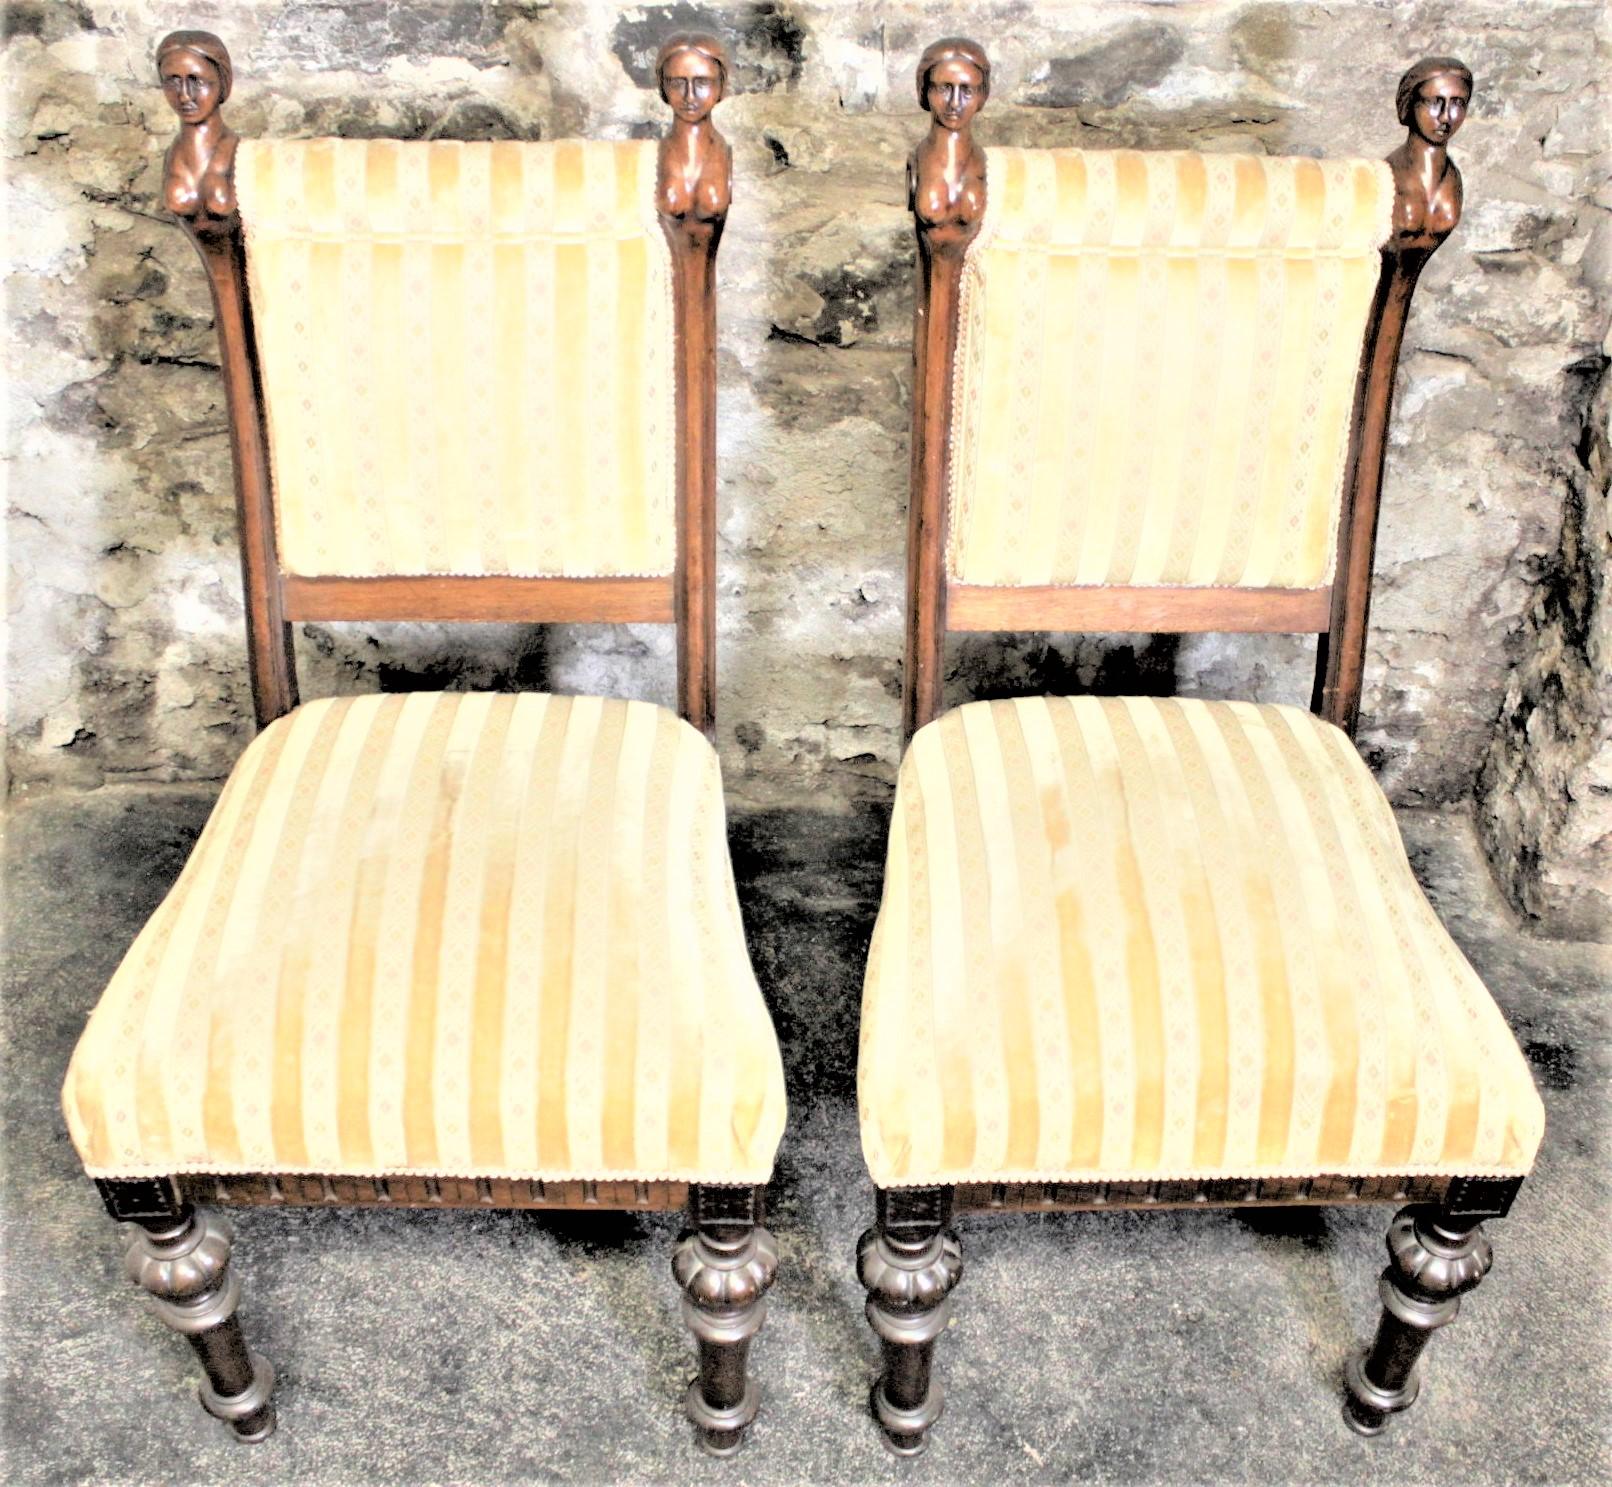 Hand-Carved Pair of Antique American Carved Walnut Parlor Chairs with Erotic Female Accents For Sale